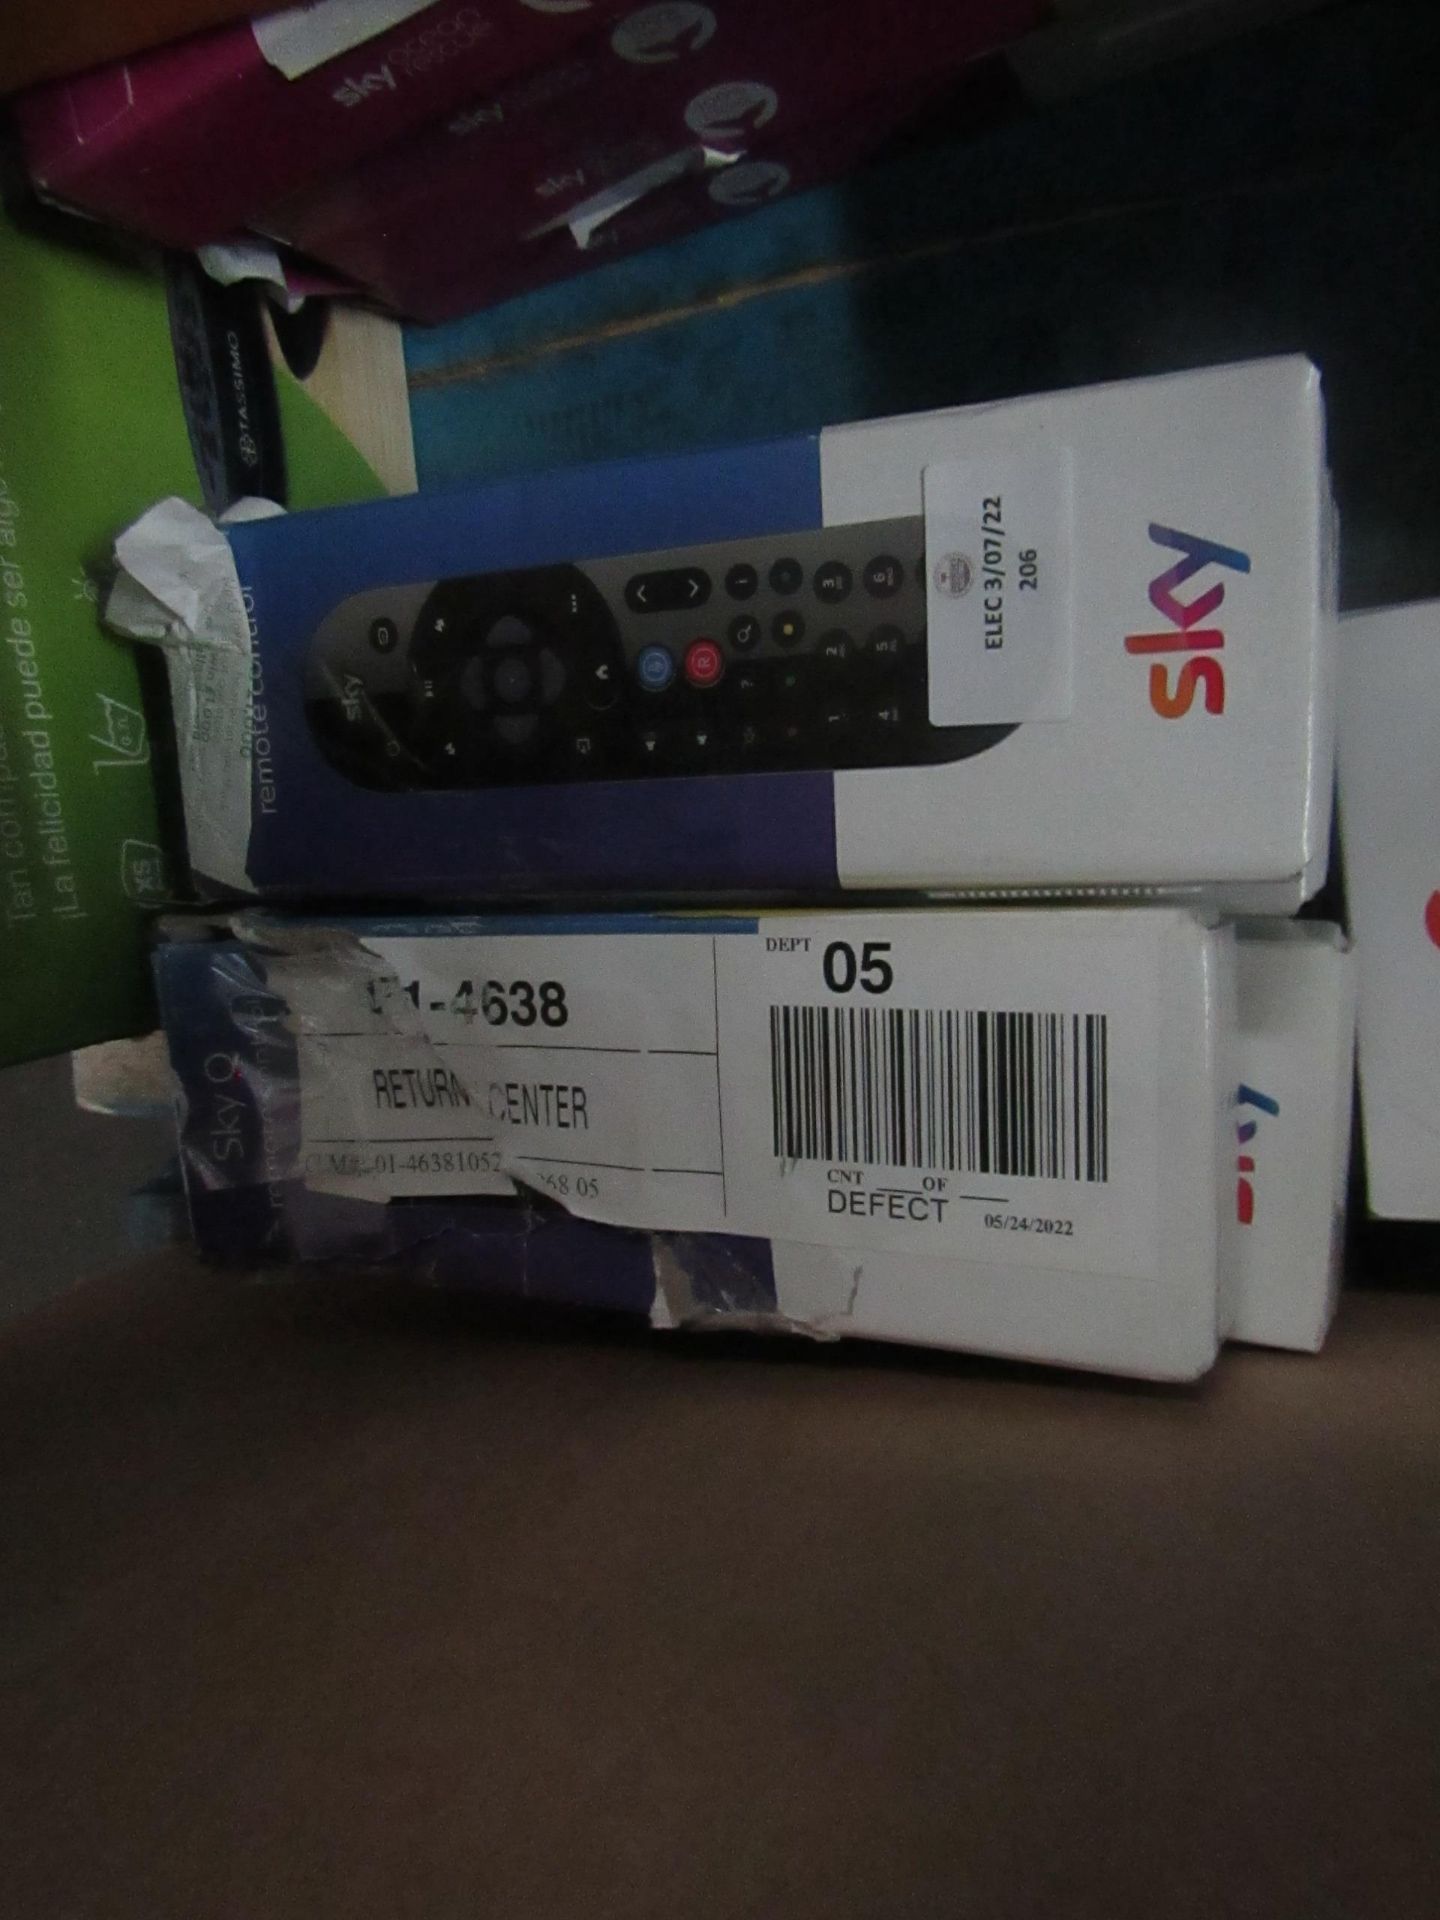 | 8X | SKY Q REMOTE CONTROLS | UNCHECKED BOXED RETURN | ITEMS ARE COMPLETELY UNCHECKED FOR PARTS